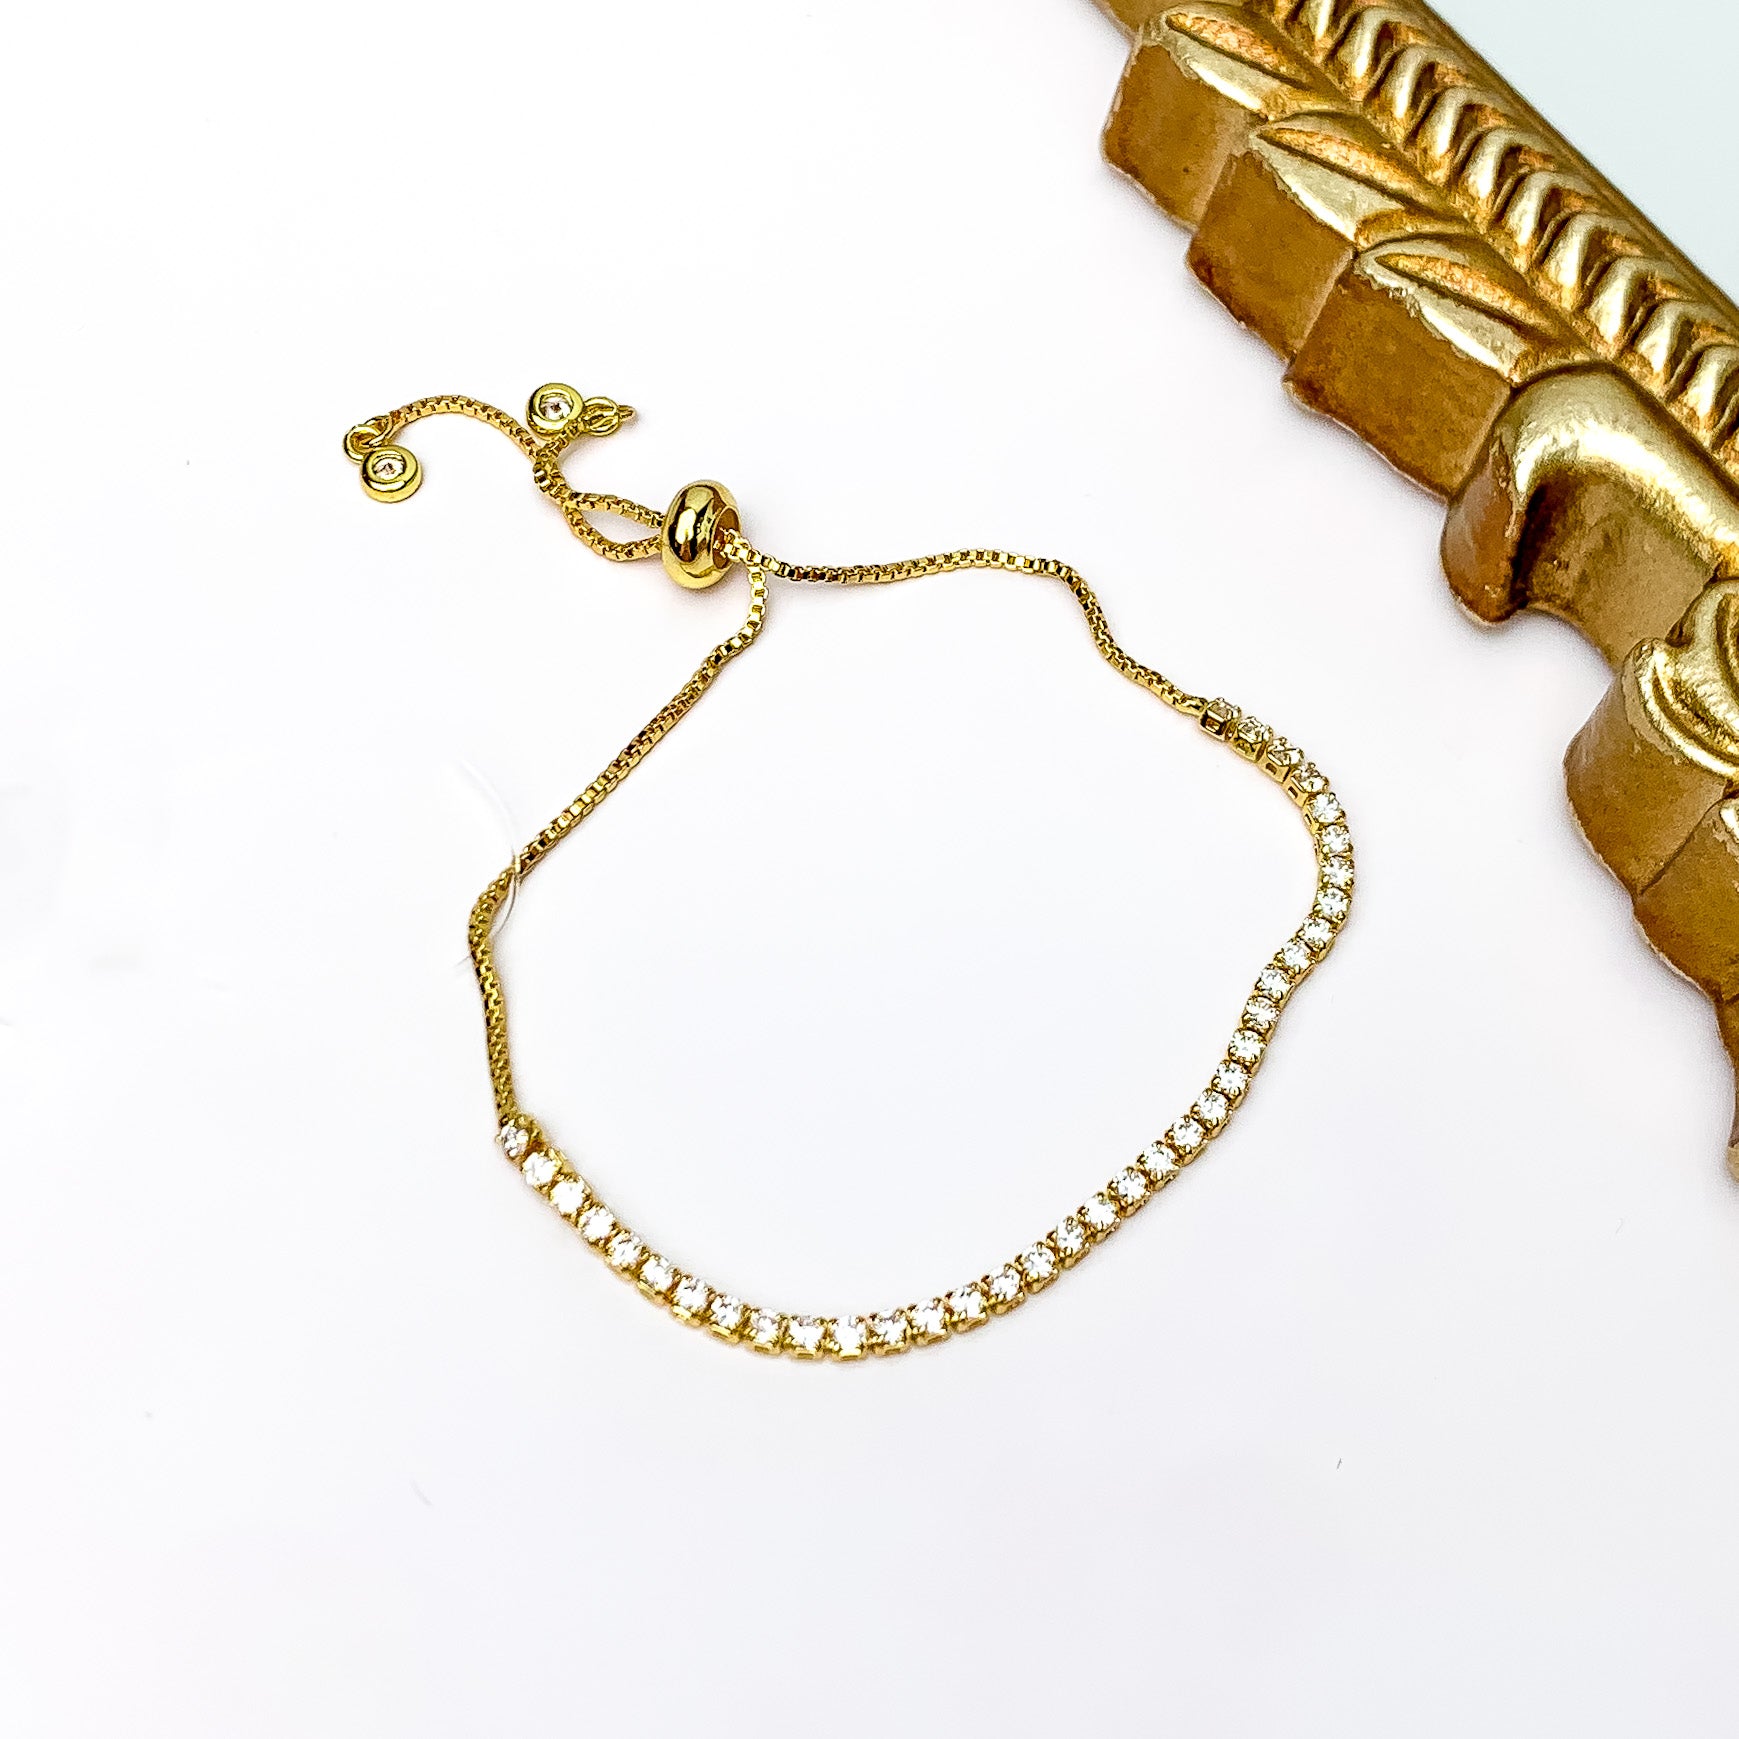 Pictured is a gold chain bracelet with a gold slider bead for adjusting. This bracelet also includes clear crystals on half of the bracelet. This bracelet is pictured on a white background with a gold mirror shown in the top right corner.  